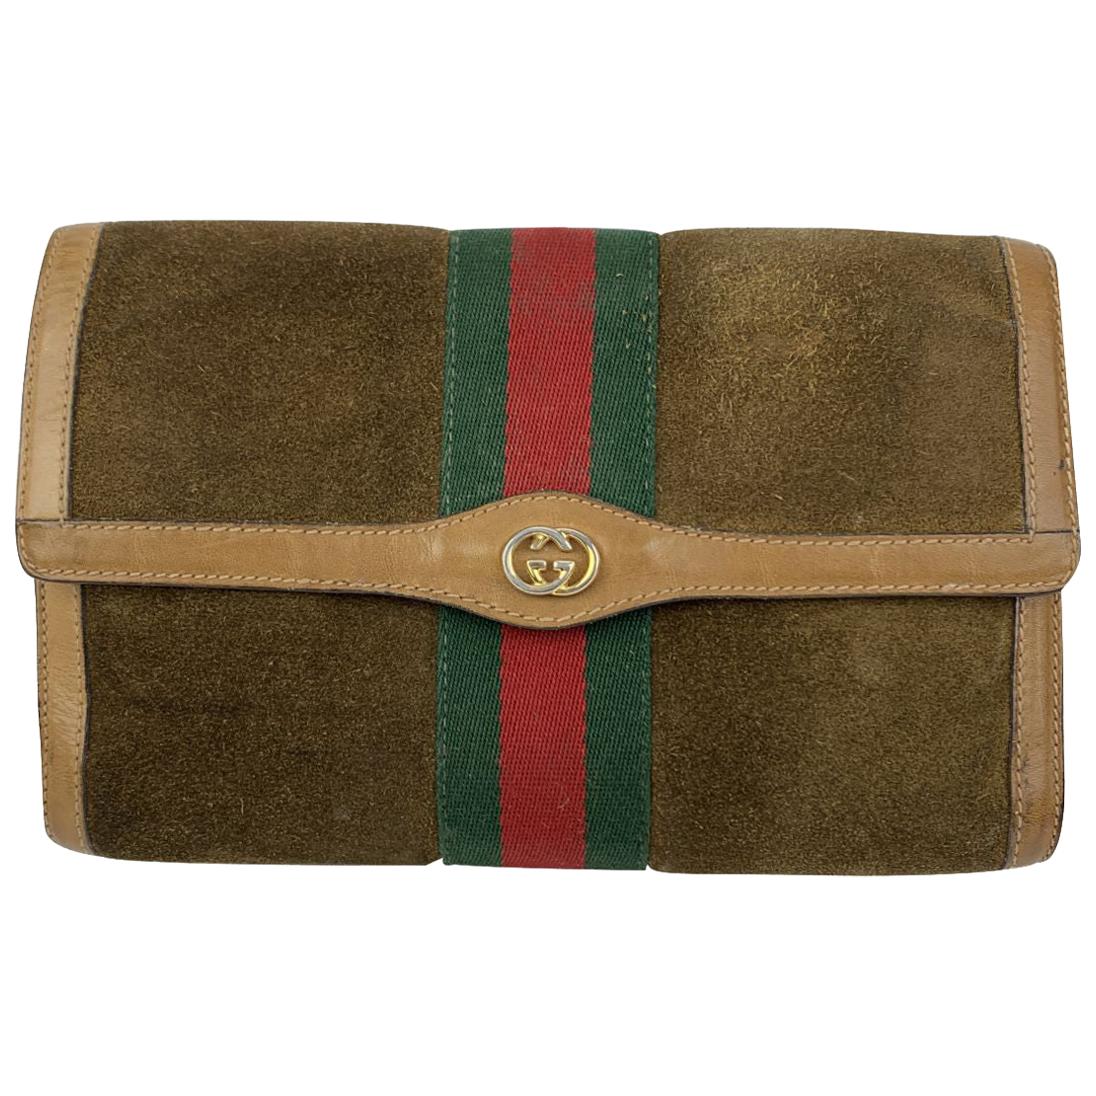 Gucci Vintage Brown Suede Flap Cosmetic Bag Clutch with Stripes